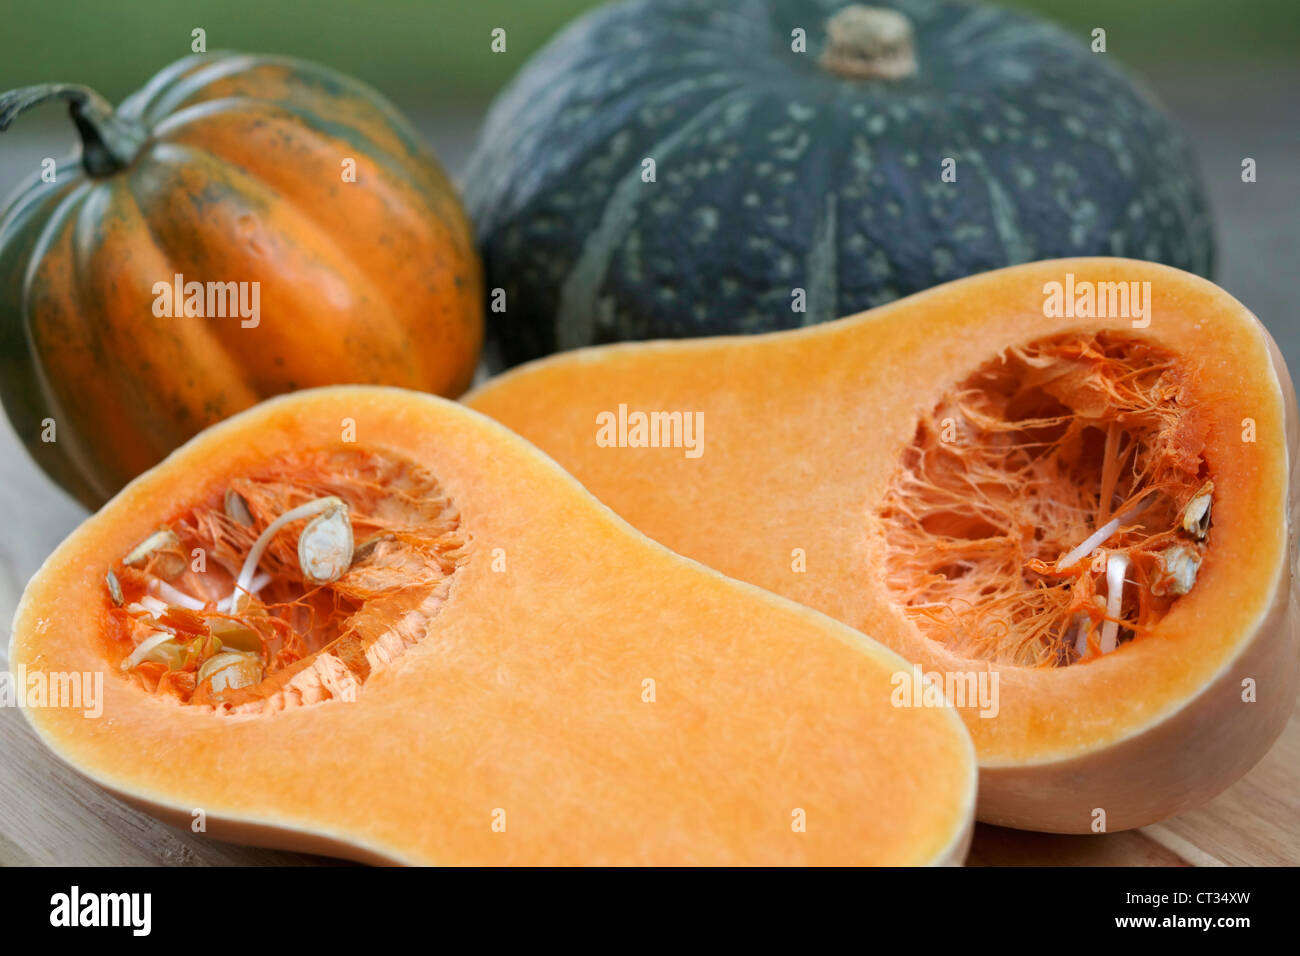 Squash, Butternut Acorn and Buttercup Vegetable Squashes Stock Photo